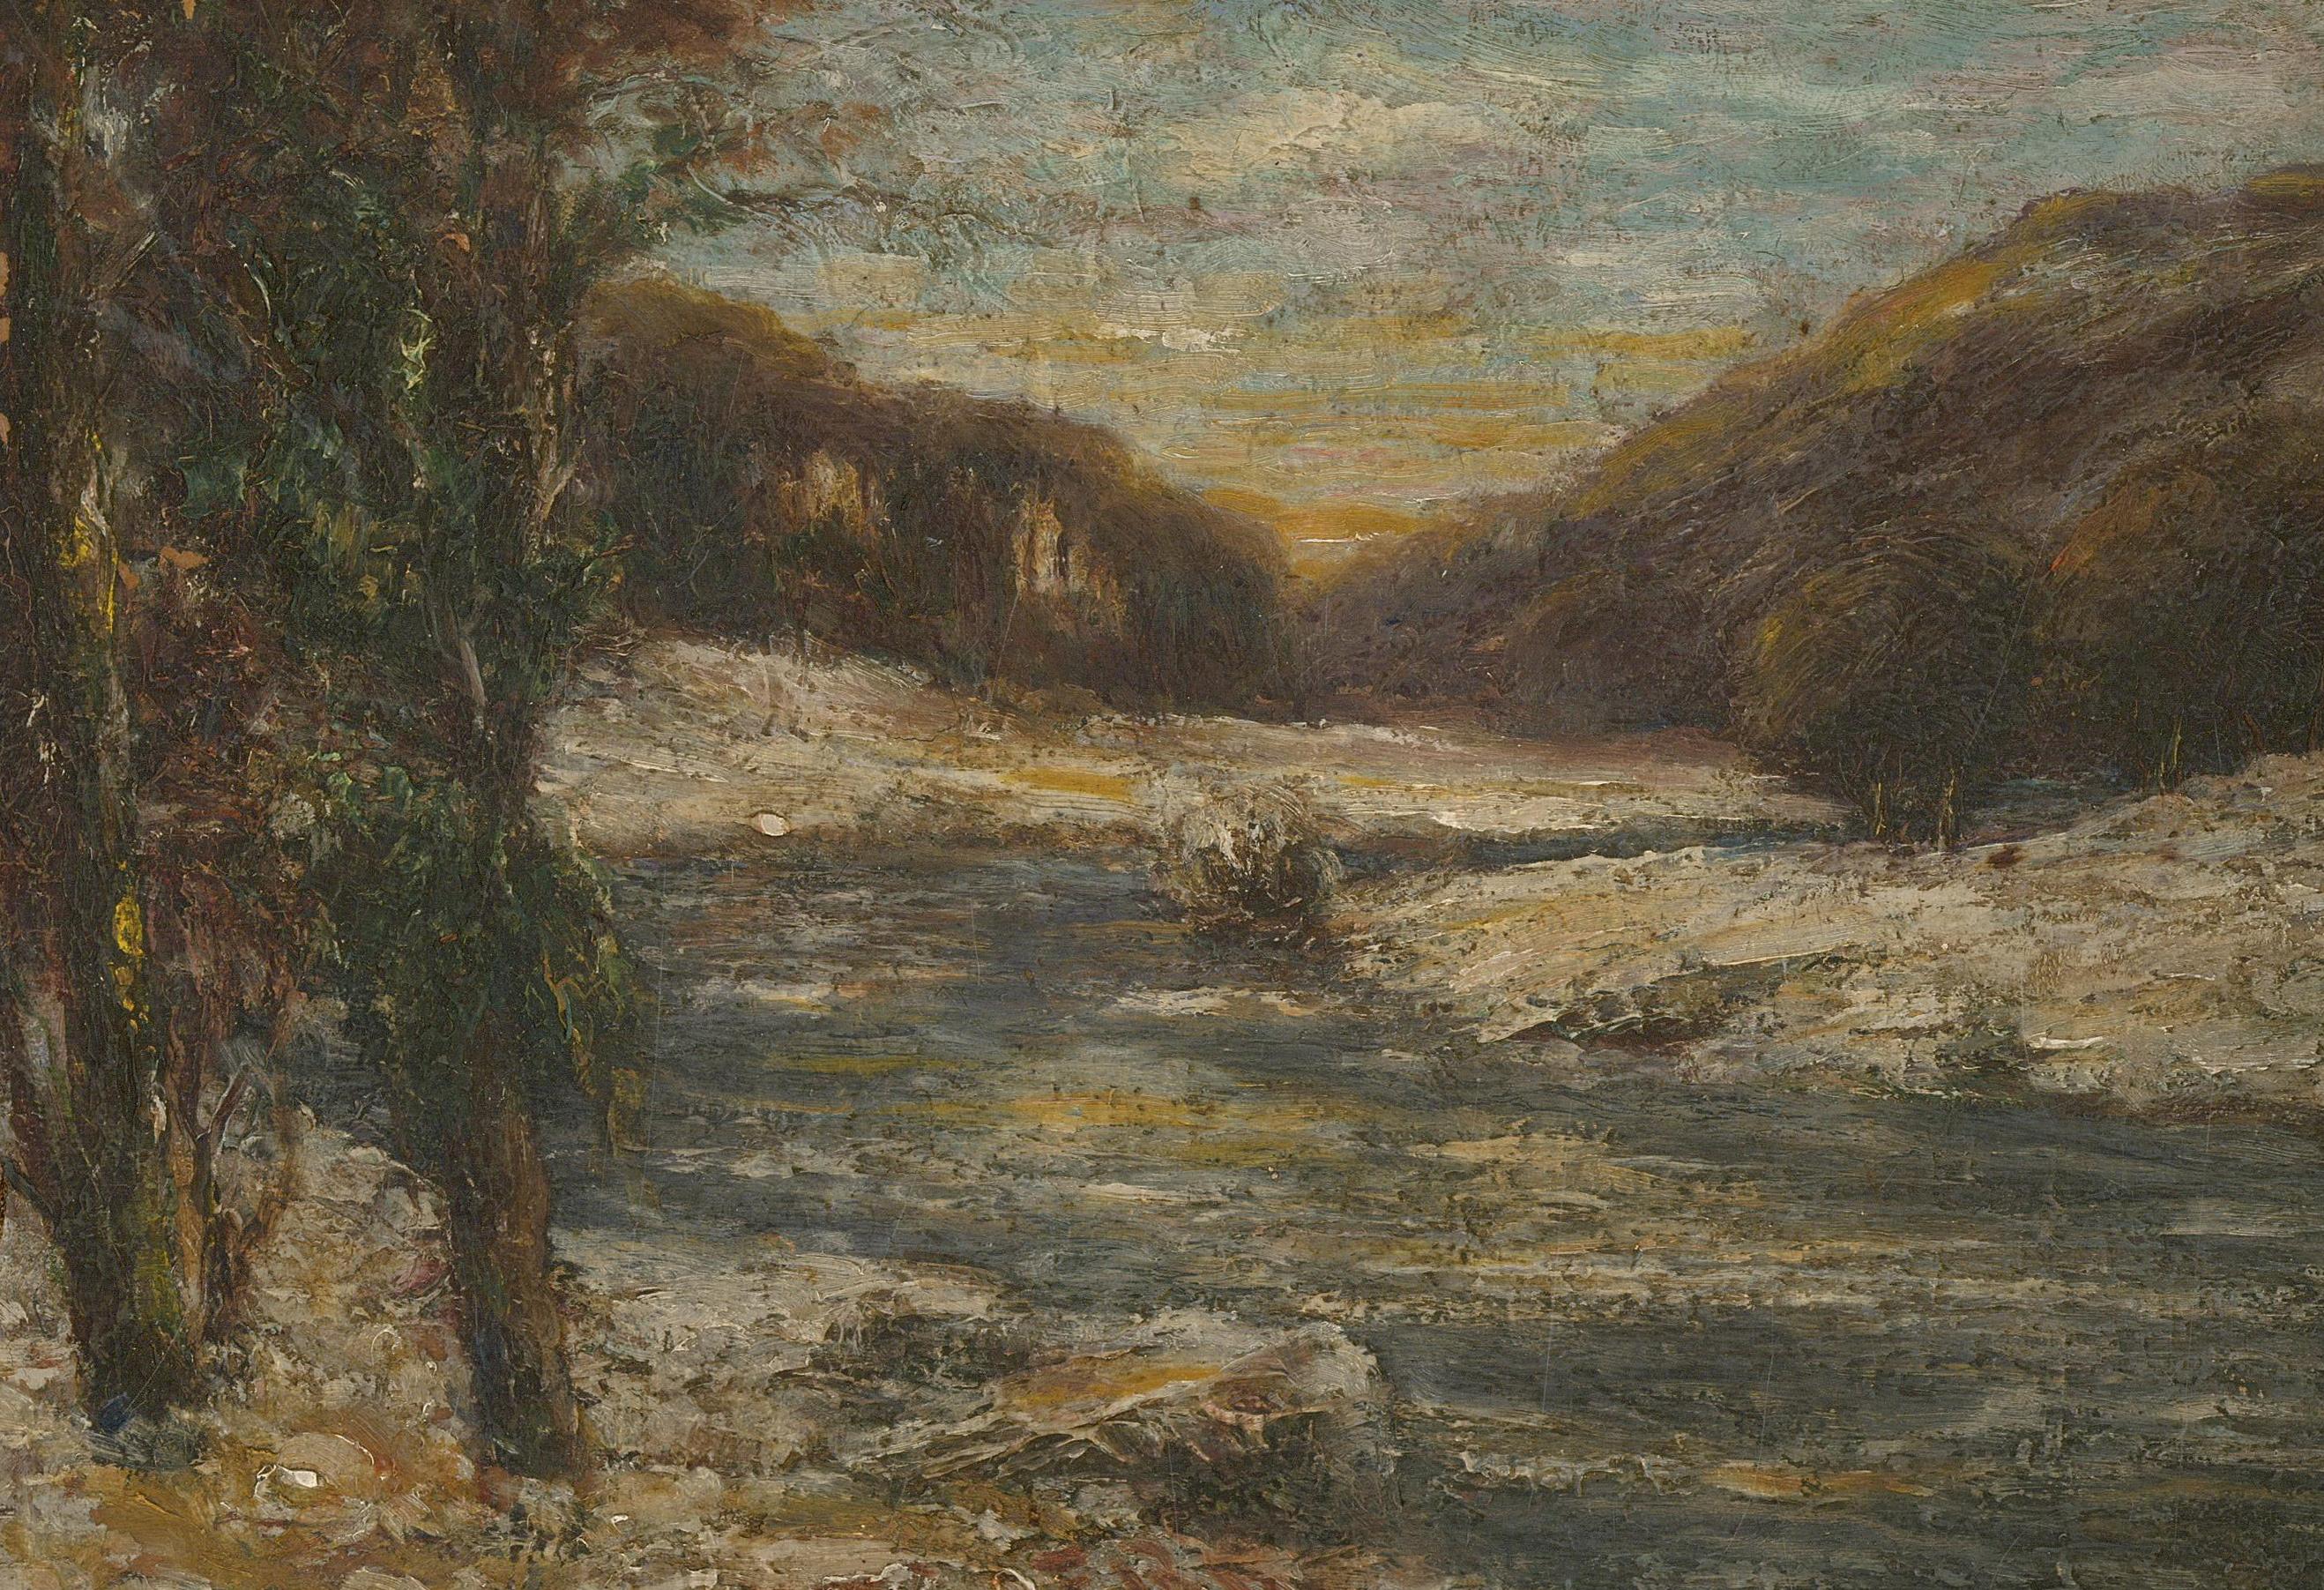 A harsh impasto depicts the last rays of the sun hitting a rocky river in this wintery scene.

This artwork well presented in a linen frame with a gilded border leading to a cream slip.

The painting is distinctly signed in the middle of the bottom